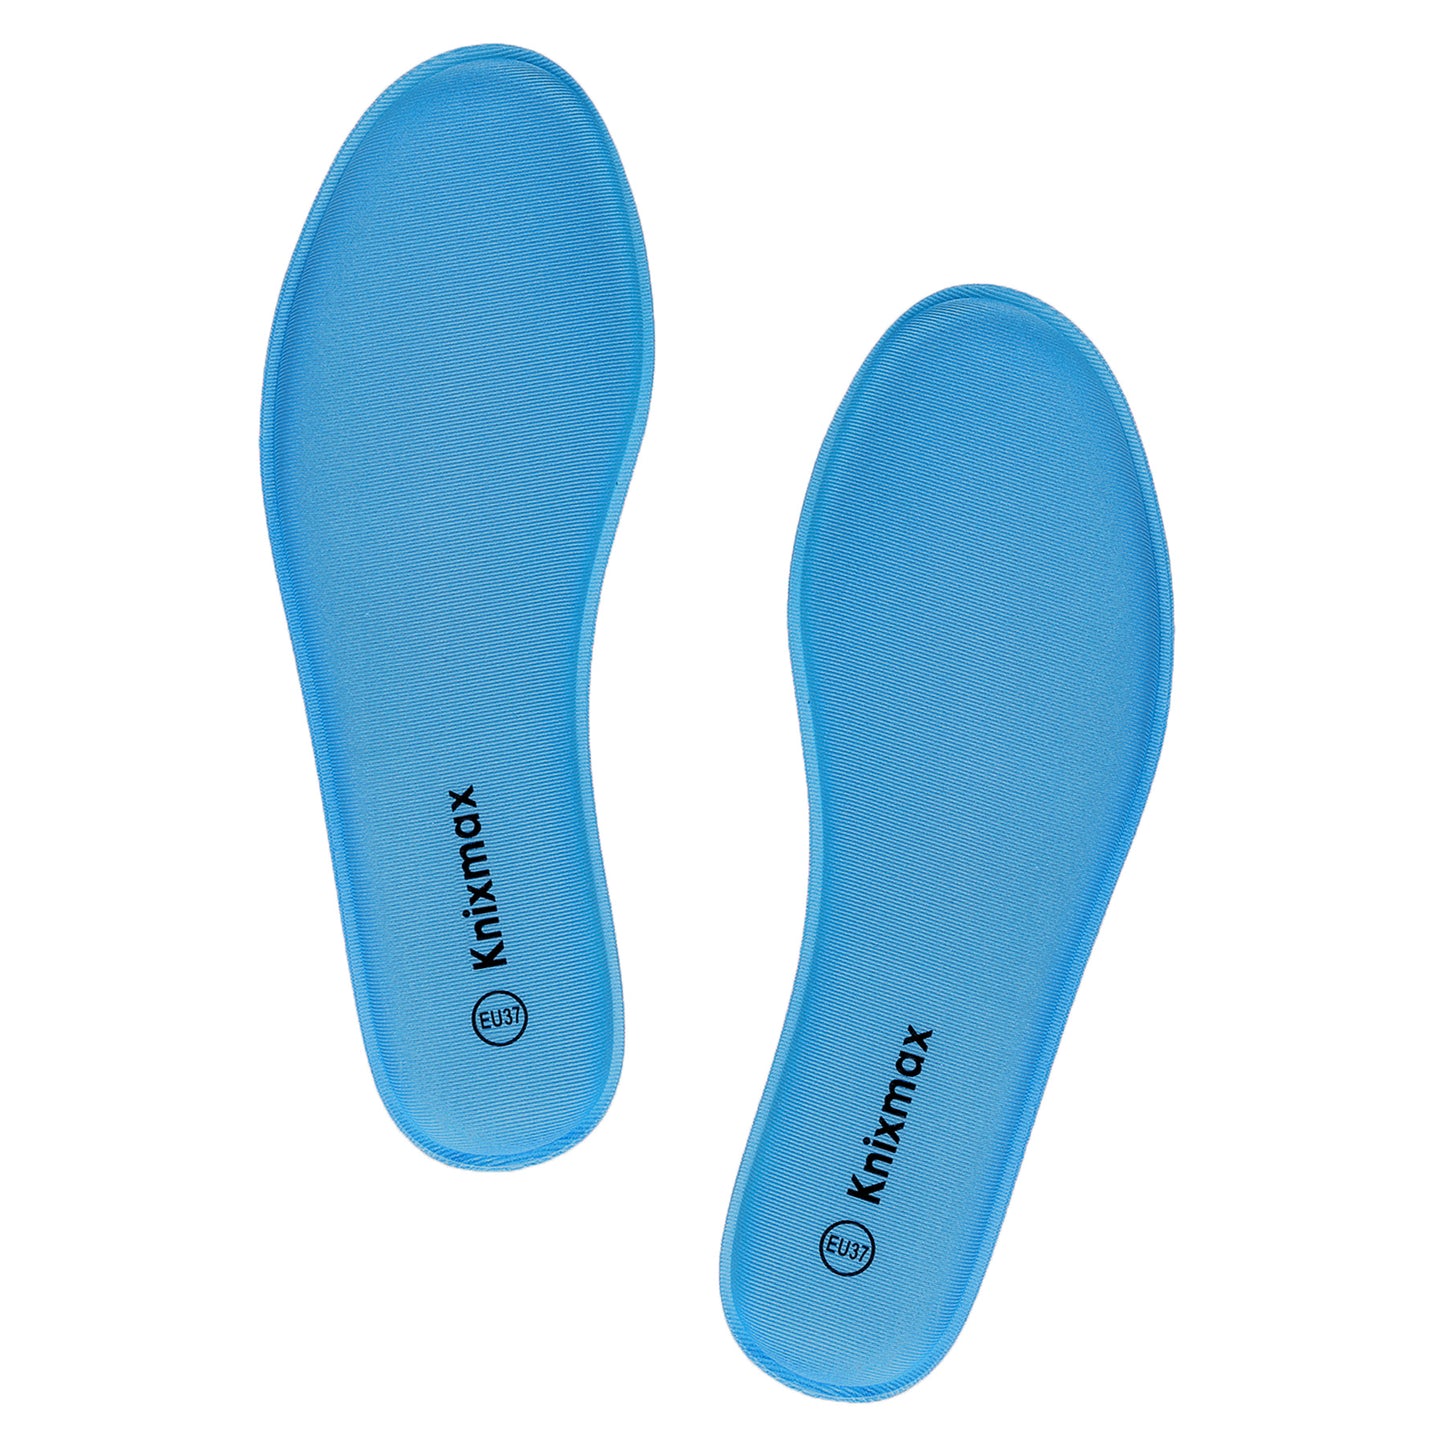 Knixmax Women's Memory Foam Insoles, Blue, for Athletic Shoes & Sneakers